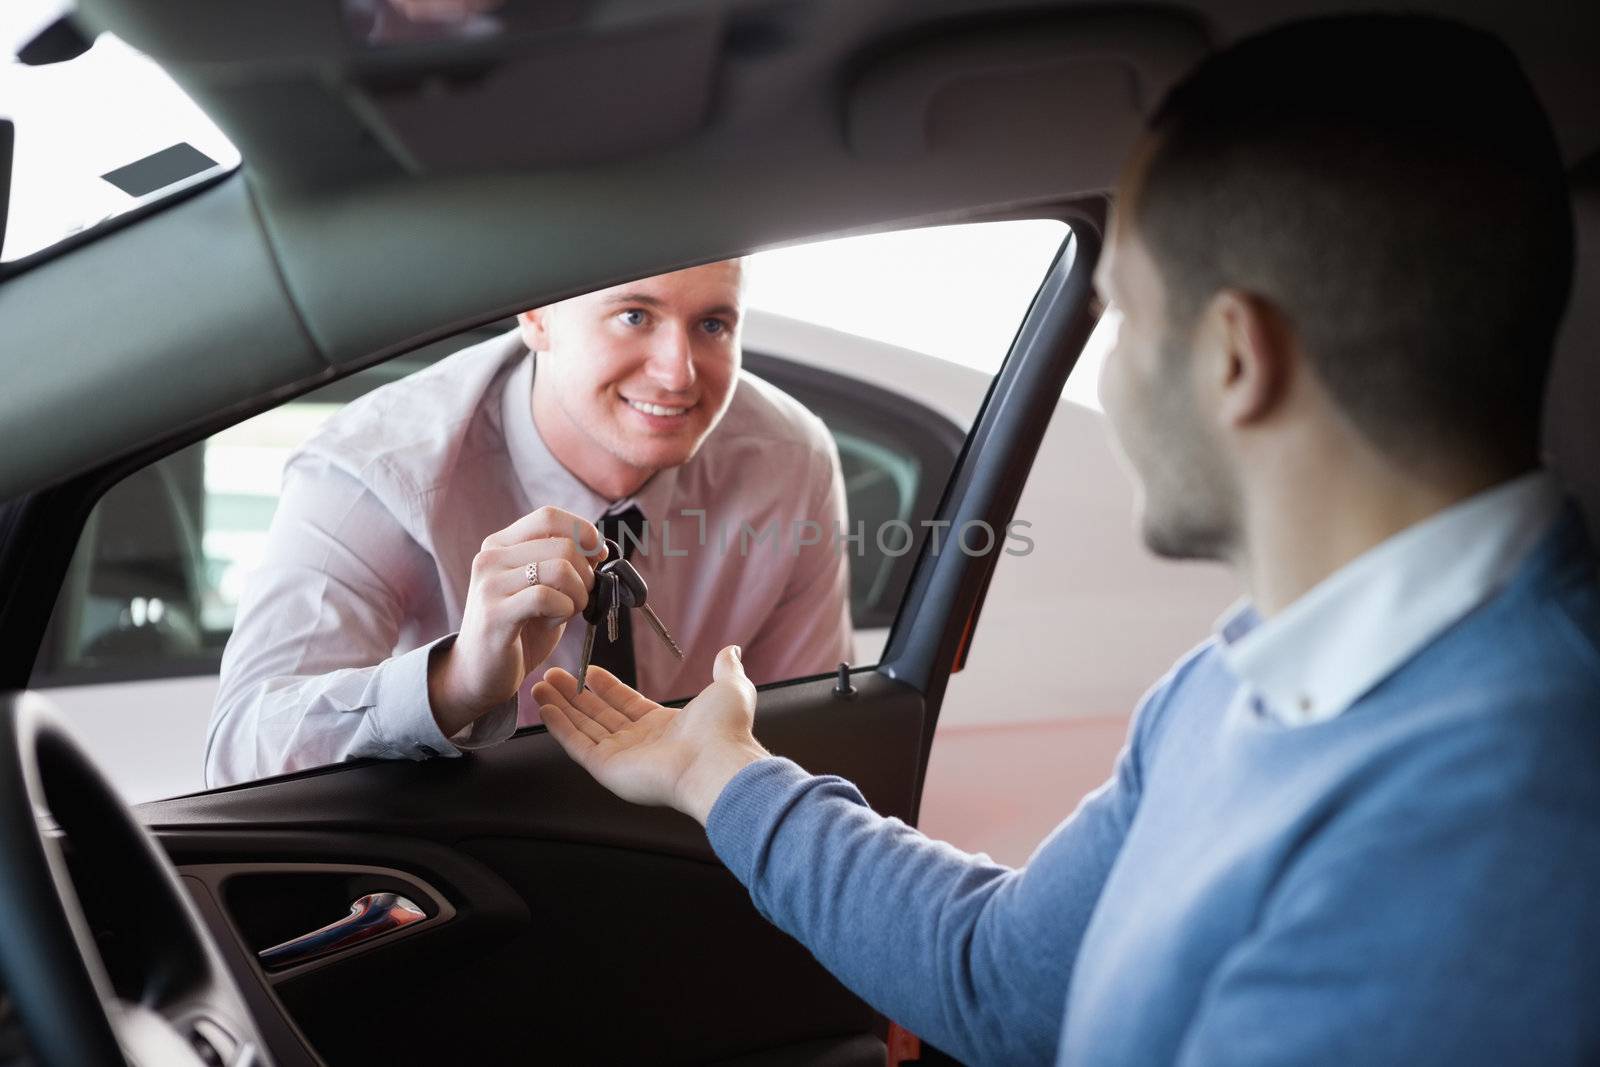 Smiling salesman giving keys to a customer in a car